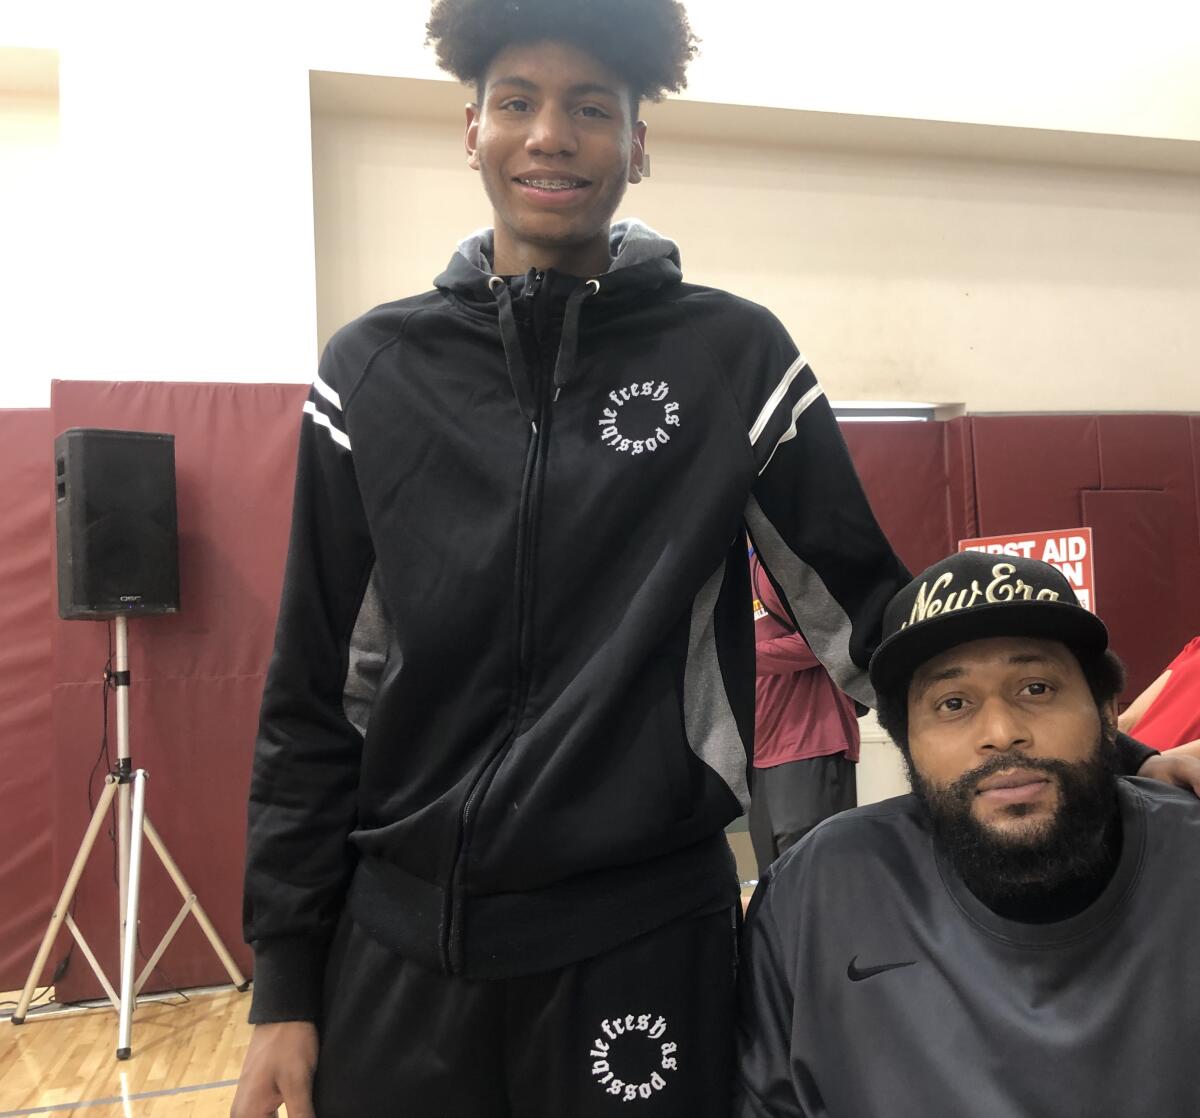 Etiwanda's Tyree Campbell (left) with his father, Zerrick, who was involved in a serious car accident last August that required amputation of his legs.